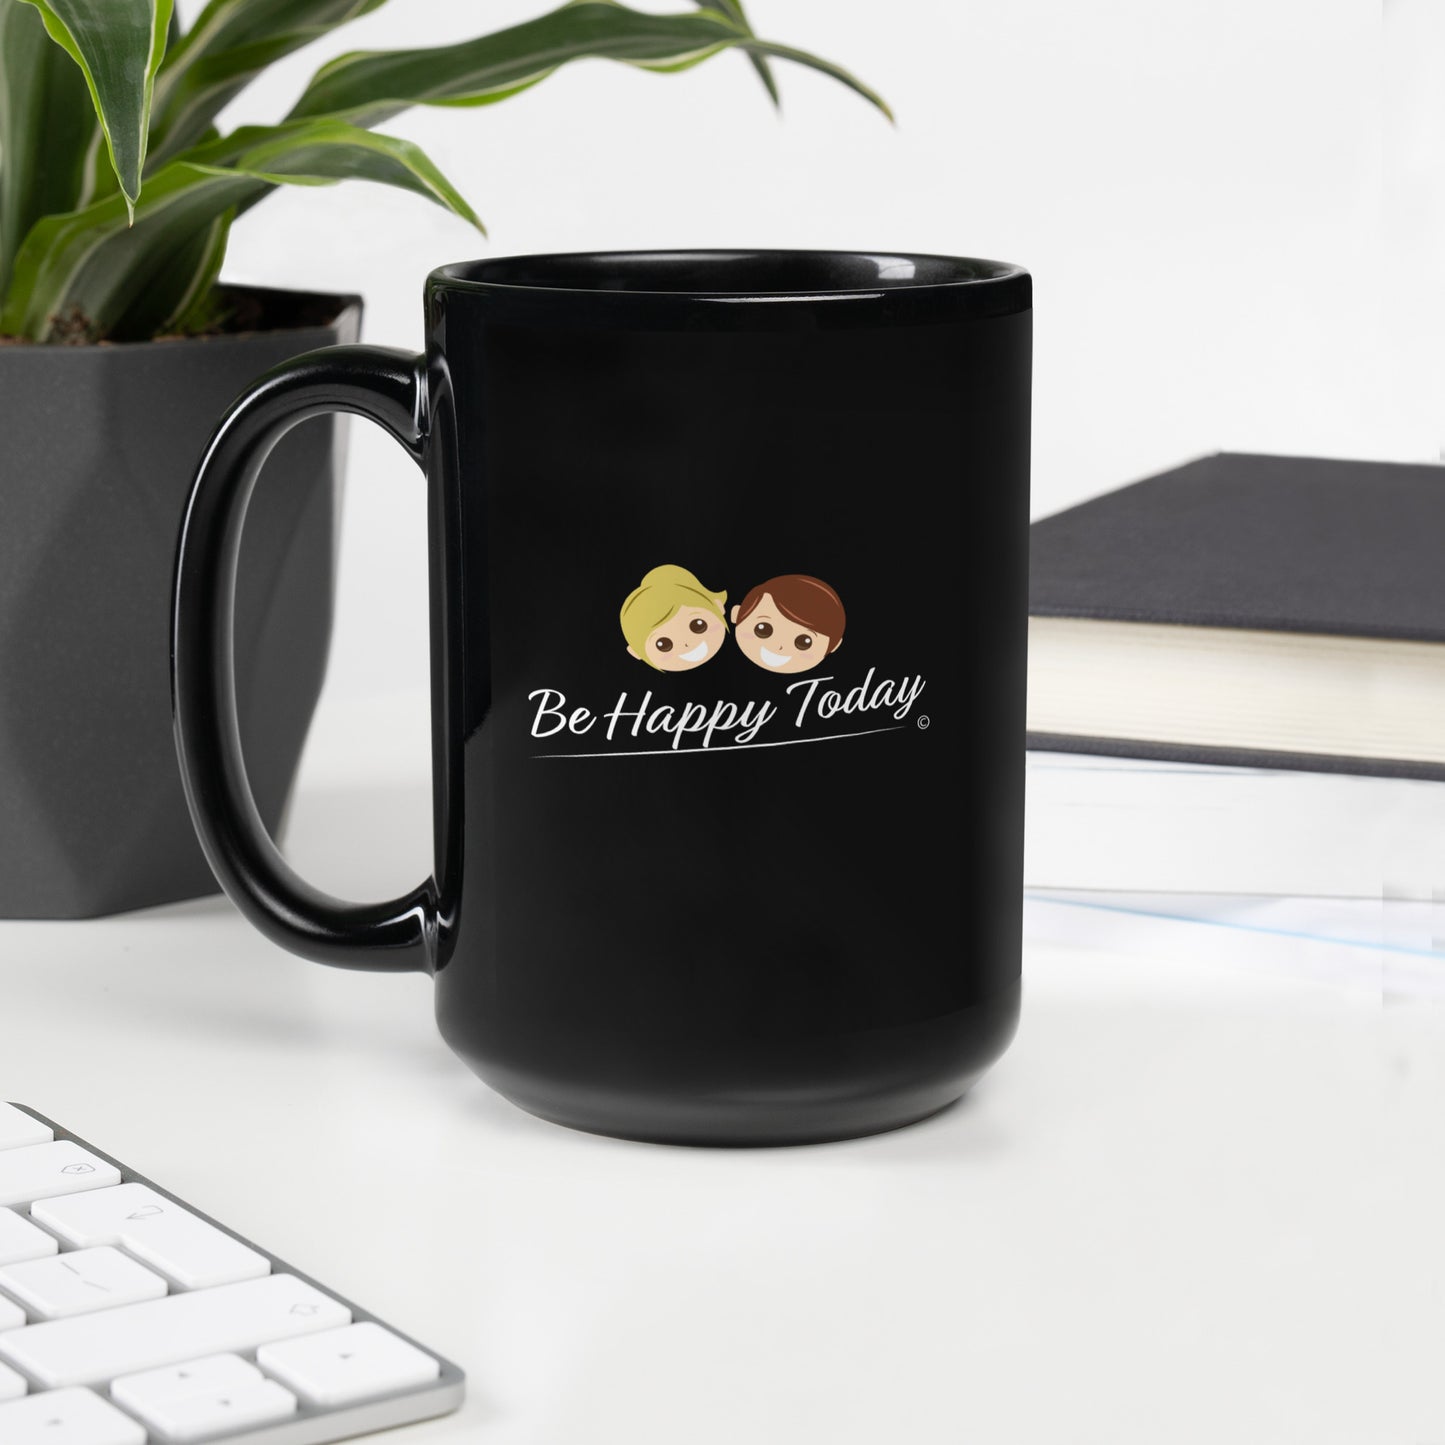 Black coffee ceramic mug with a saying Be Happy today